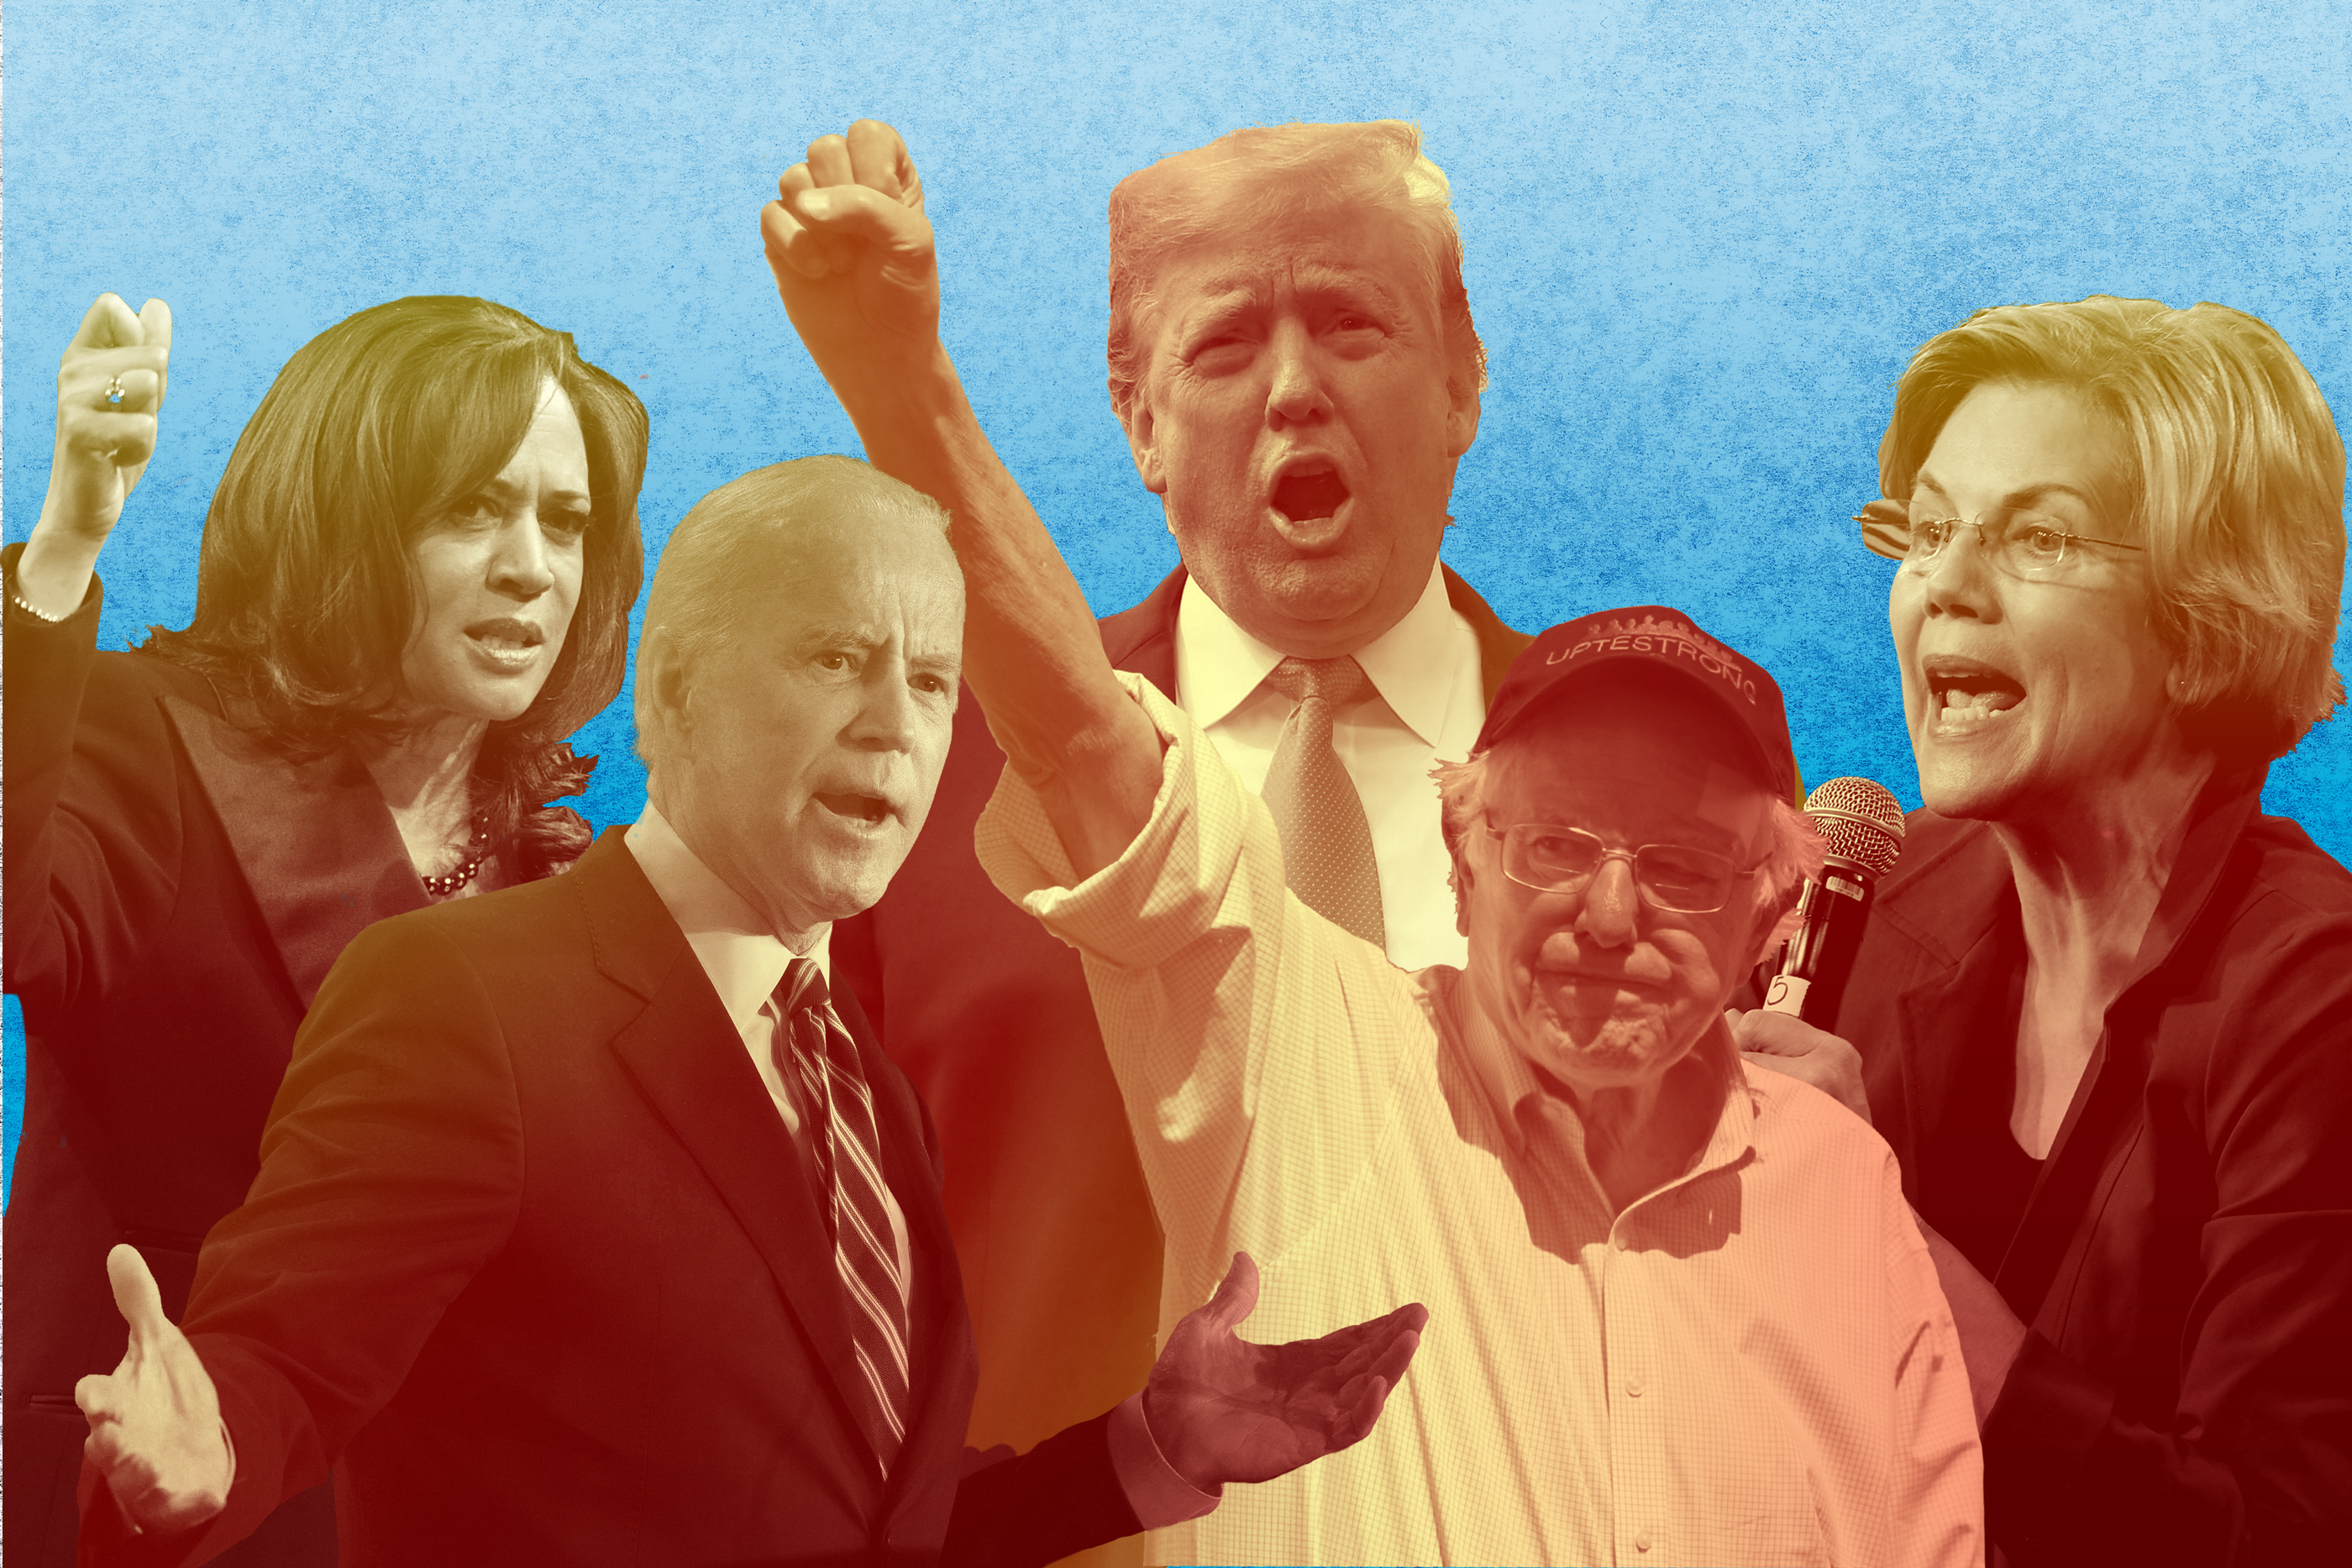 Here’s Where All the 2020 Presidential Candidates Stand on Key Workplace Issues — From Paid Family Leave to Minimum Wage